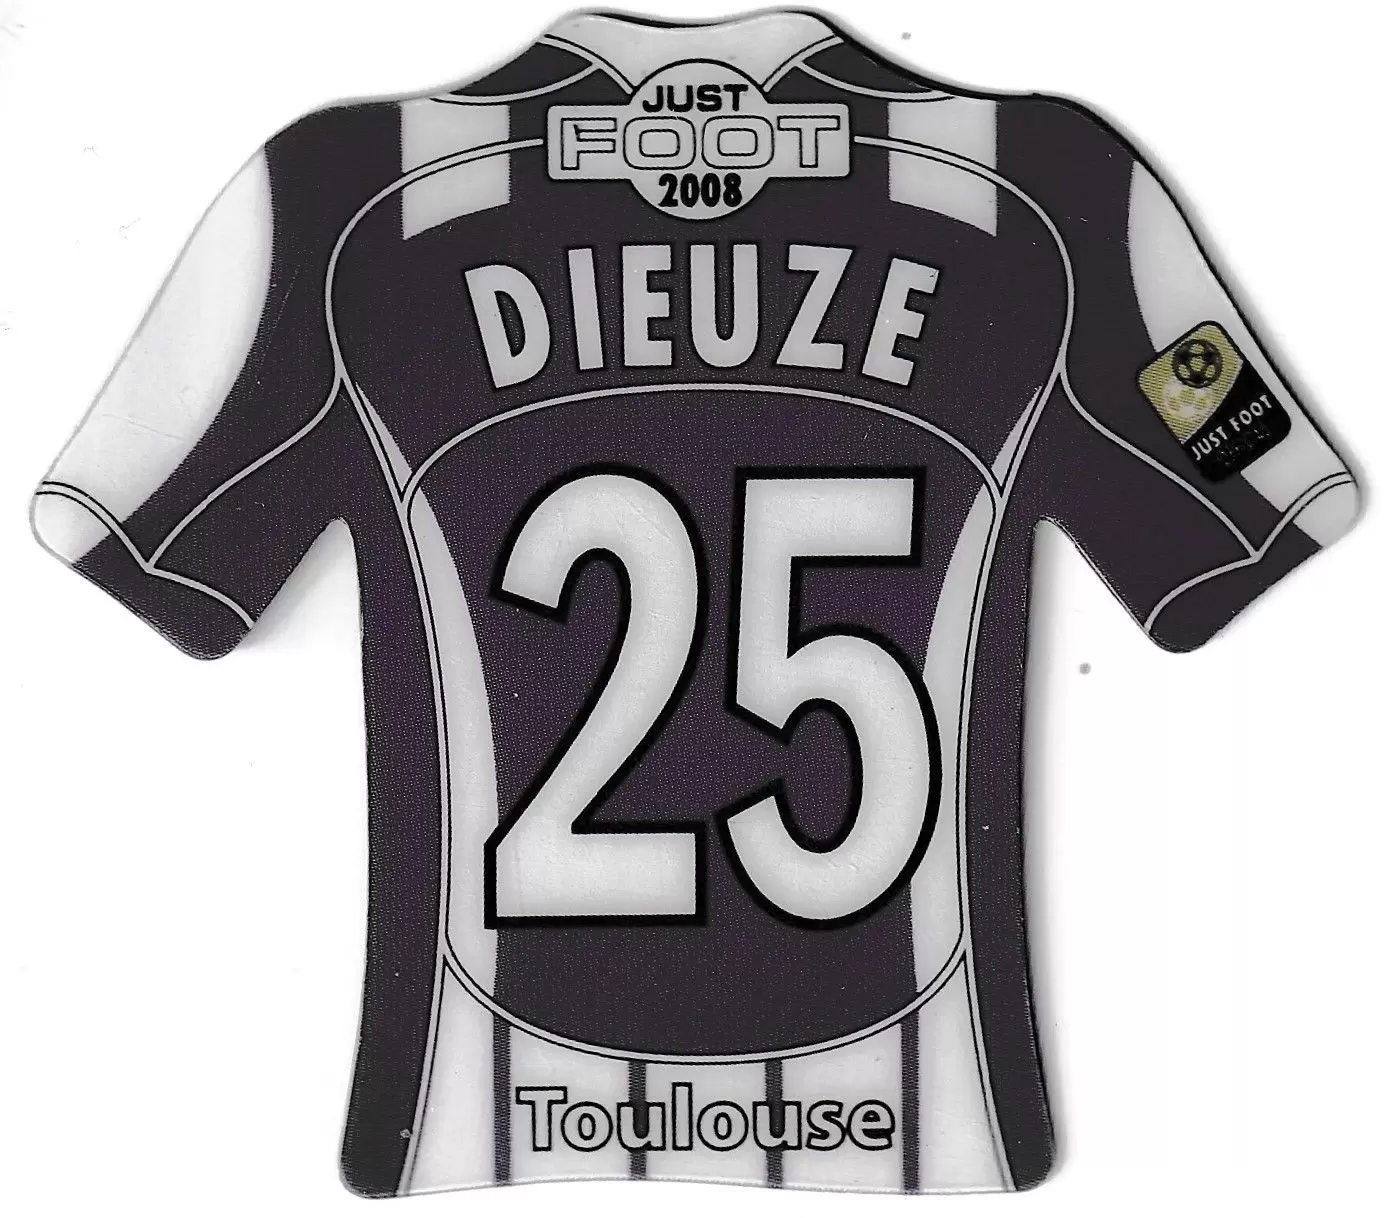 Just Foot 2008 - Toulouse 25 - Dieuze